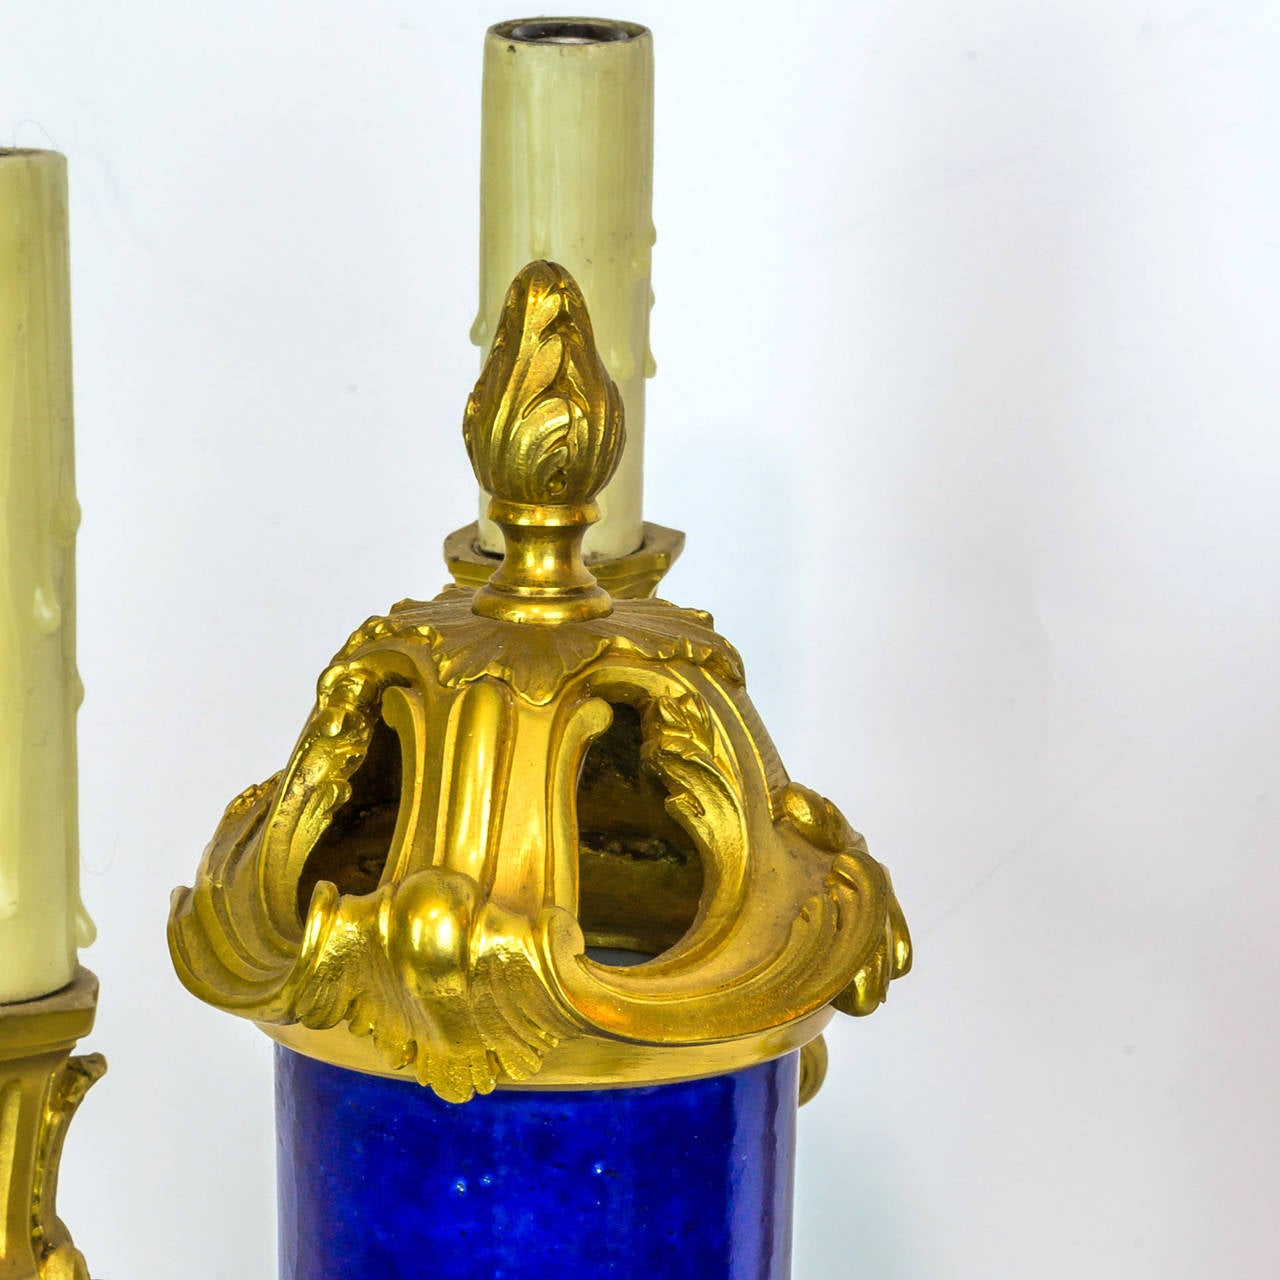 A Fine Blue Porcelain and Bronze Louis XV Style Four-Light Candelabra Centerpiece
Stock Number: LC15